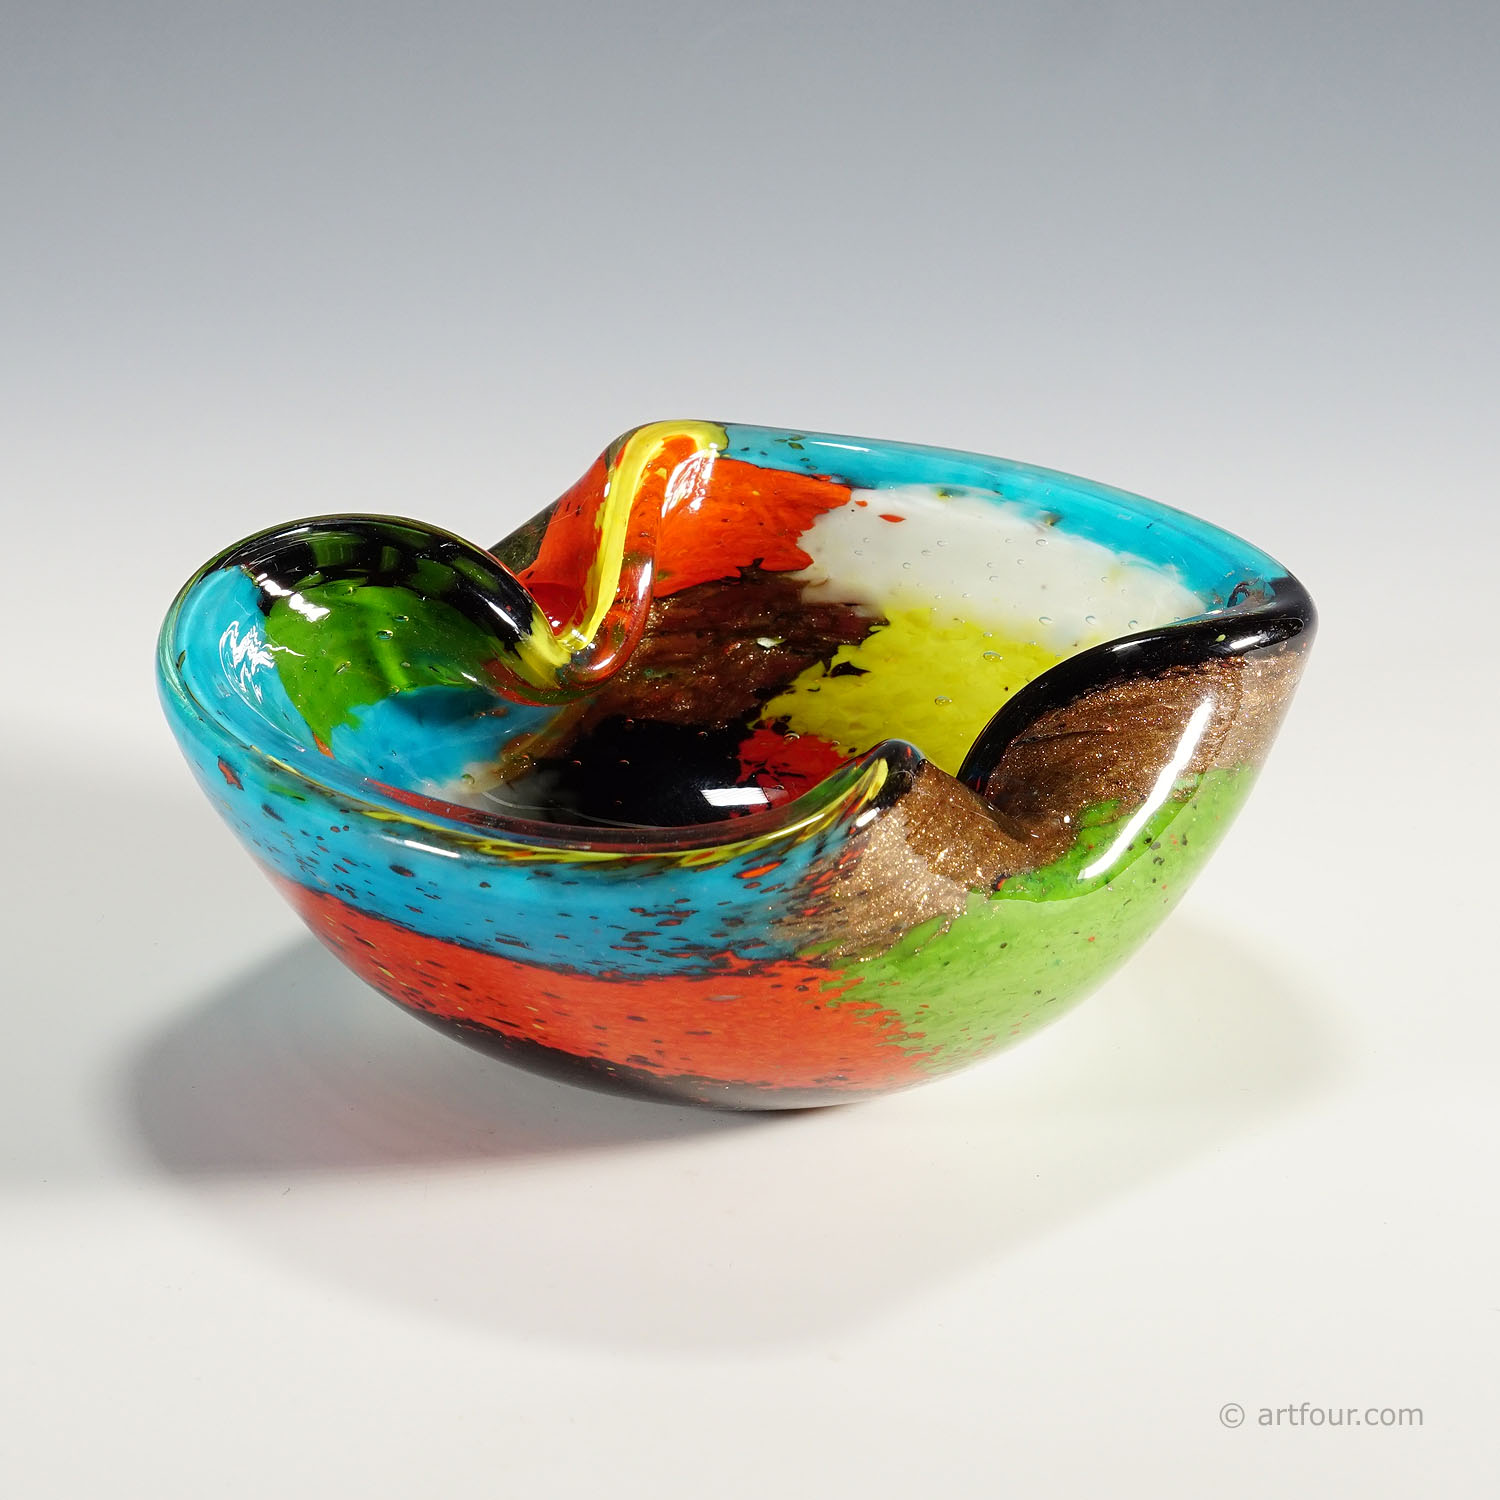 Vintage Oriente Art Glass Bowl by Dino Martens for Aureliano Toso